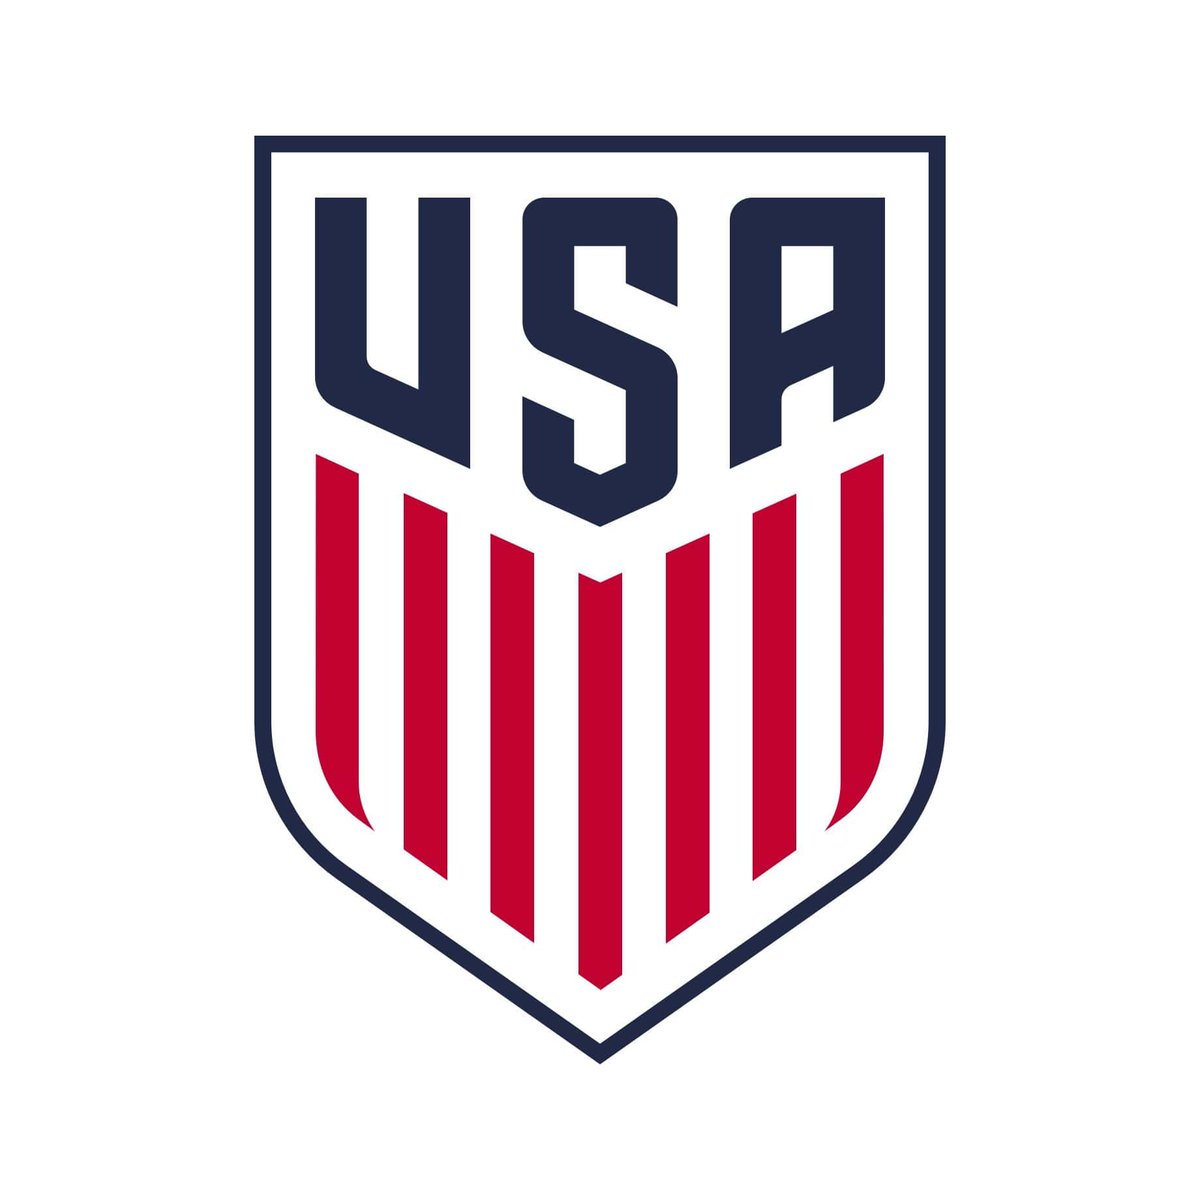 Why the USA doesn’t produce a lot of talent. A thread